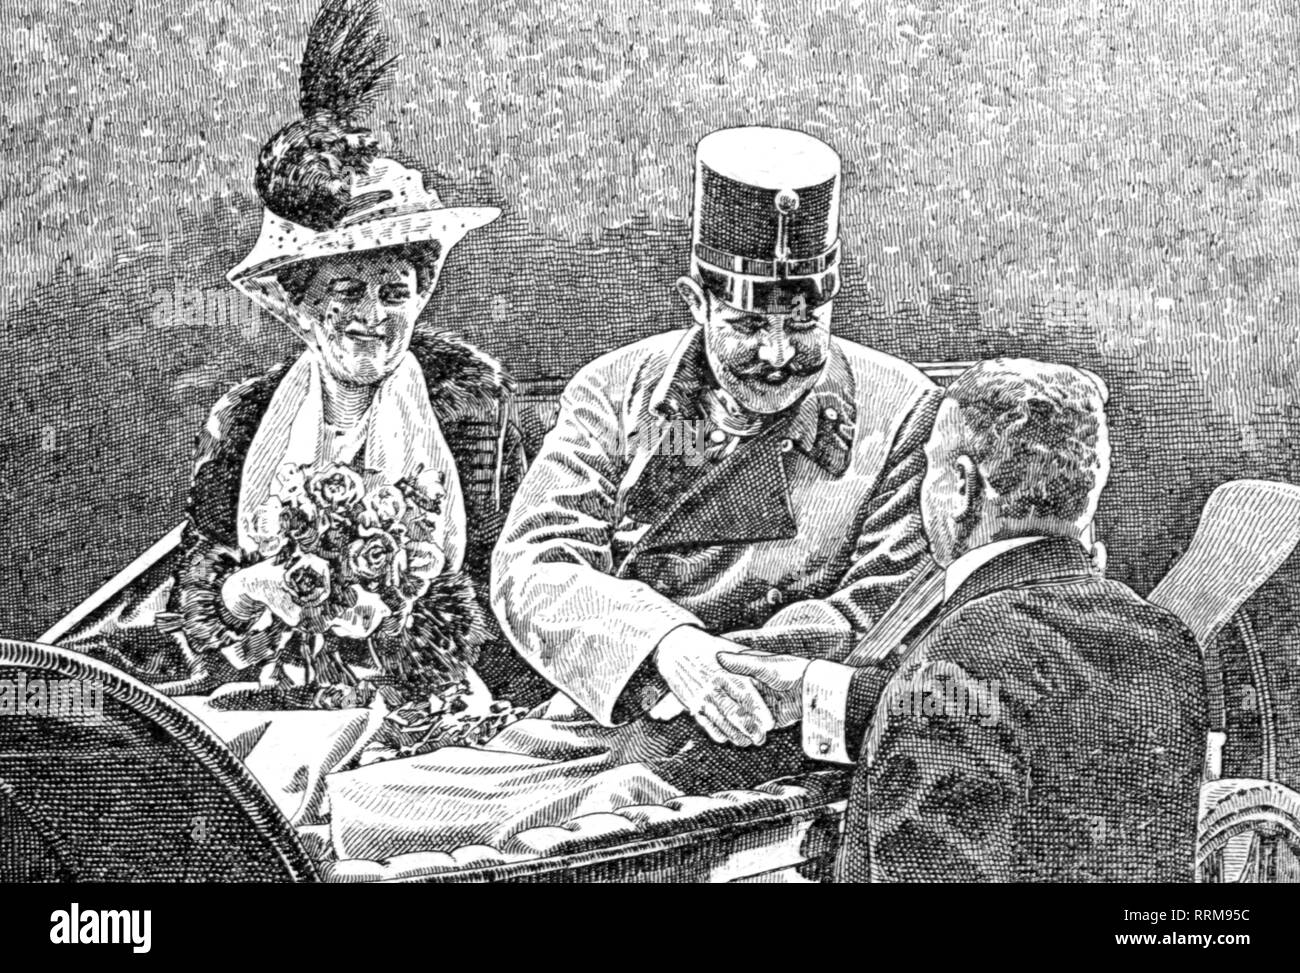 Franz Ferdinand, 18.12.1863 - 28.6.1914, Heir Presumtive of Austria-Hungary 30.1.1889 - 28.6.1914, half length, with wife Sophie Duchess of Hohenberg, shortly after the arrival at Sarajevo, 28.6.1914, contemporary drawing, Additional-Rights-Clearance-Info-Not-Available Stock Photo